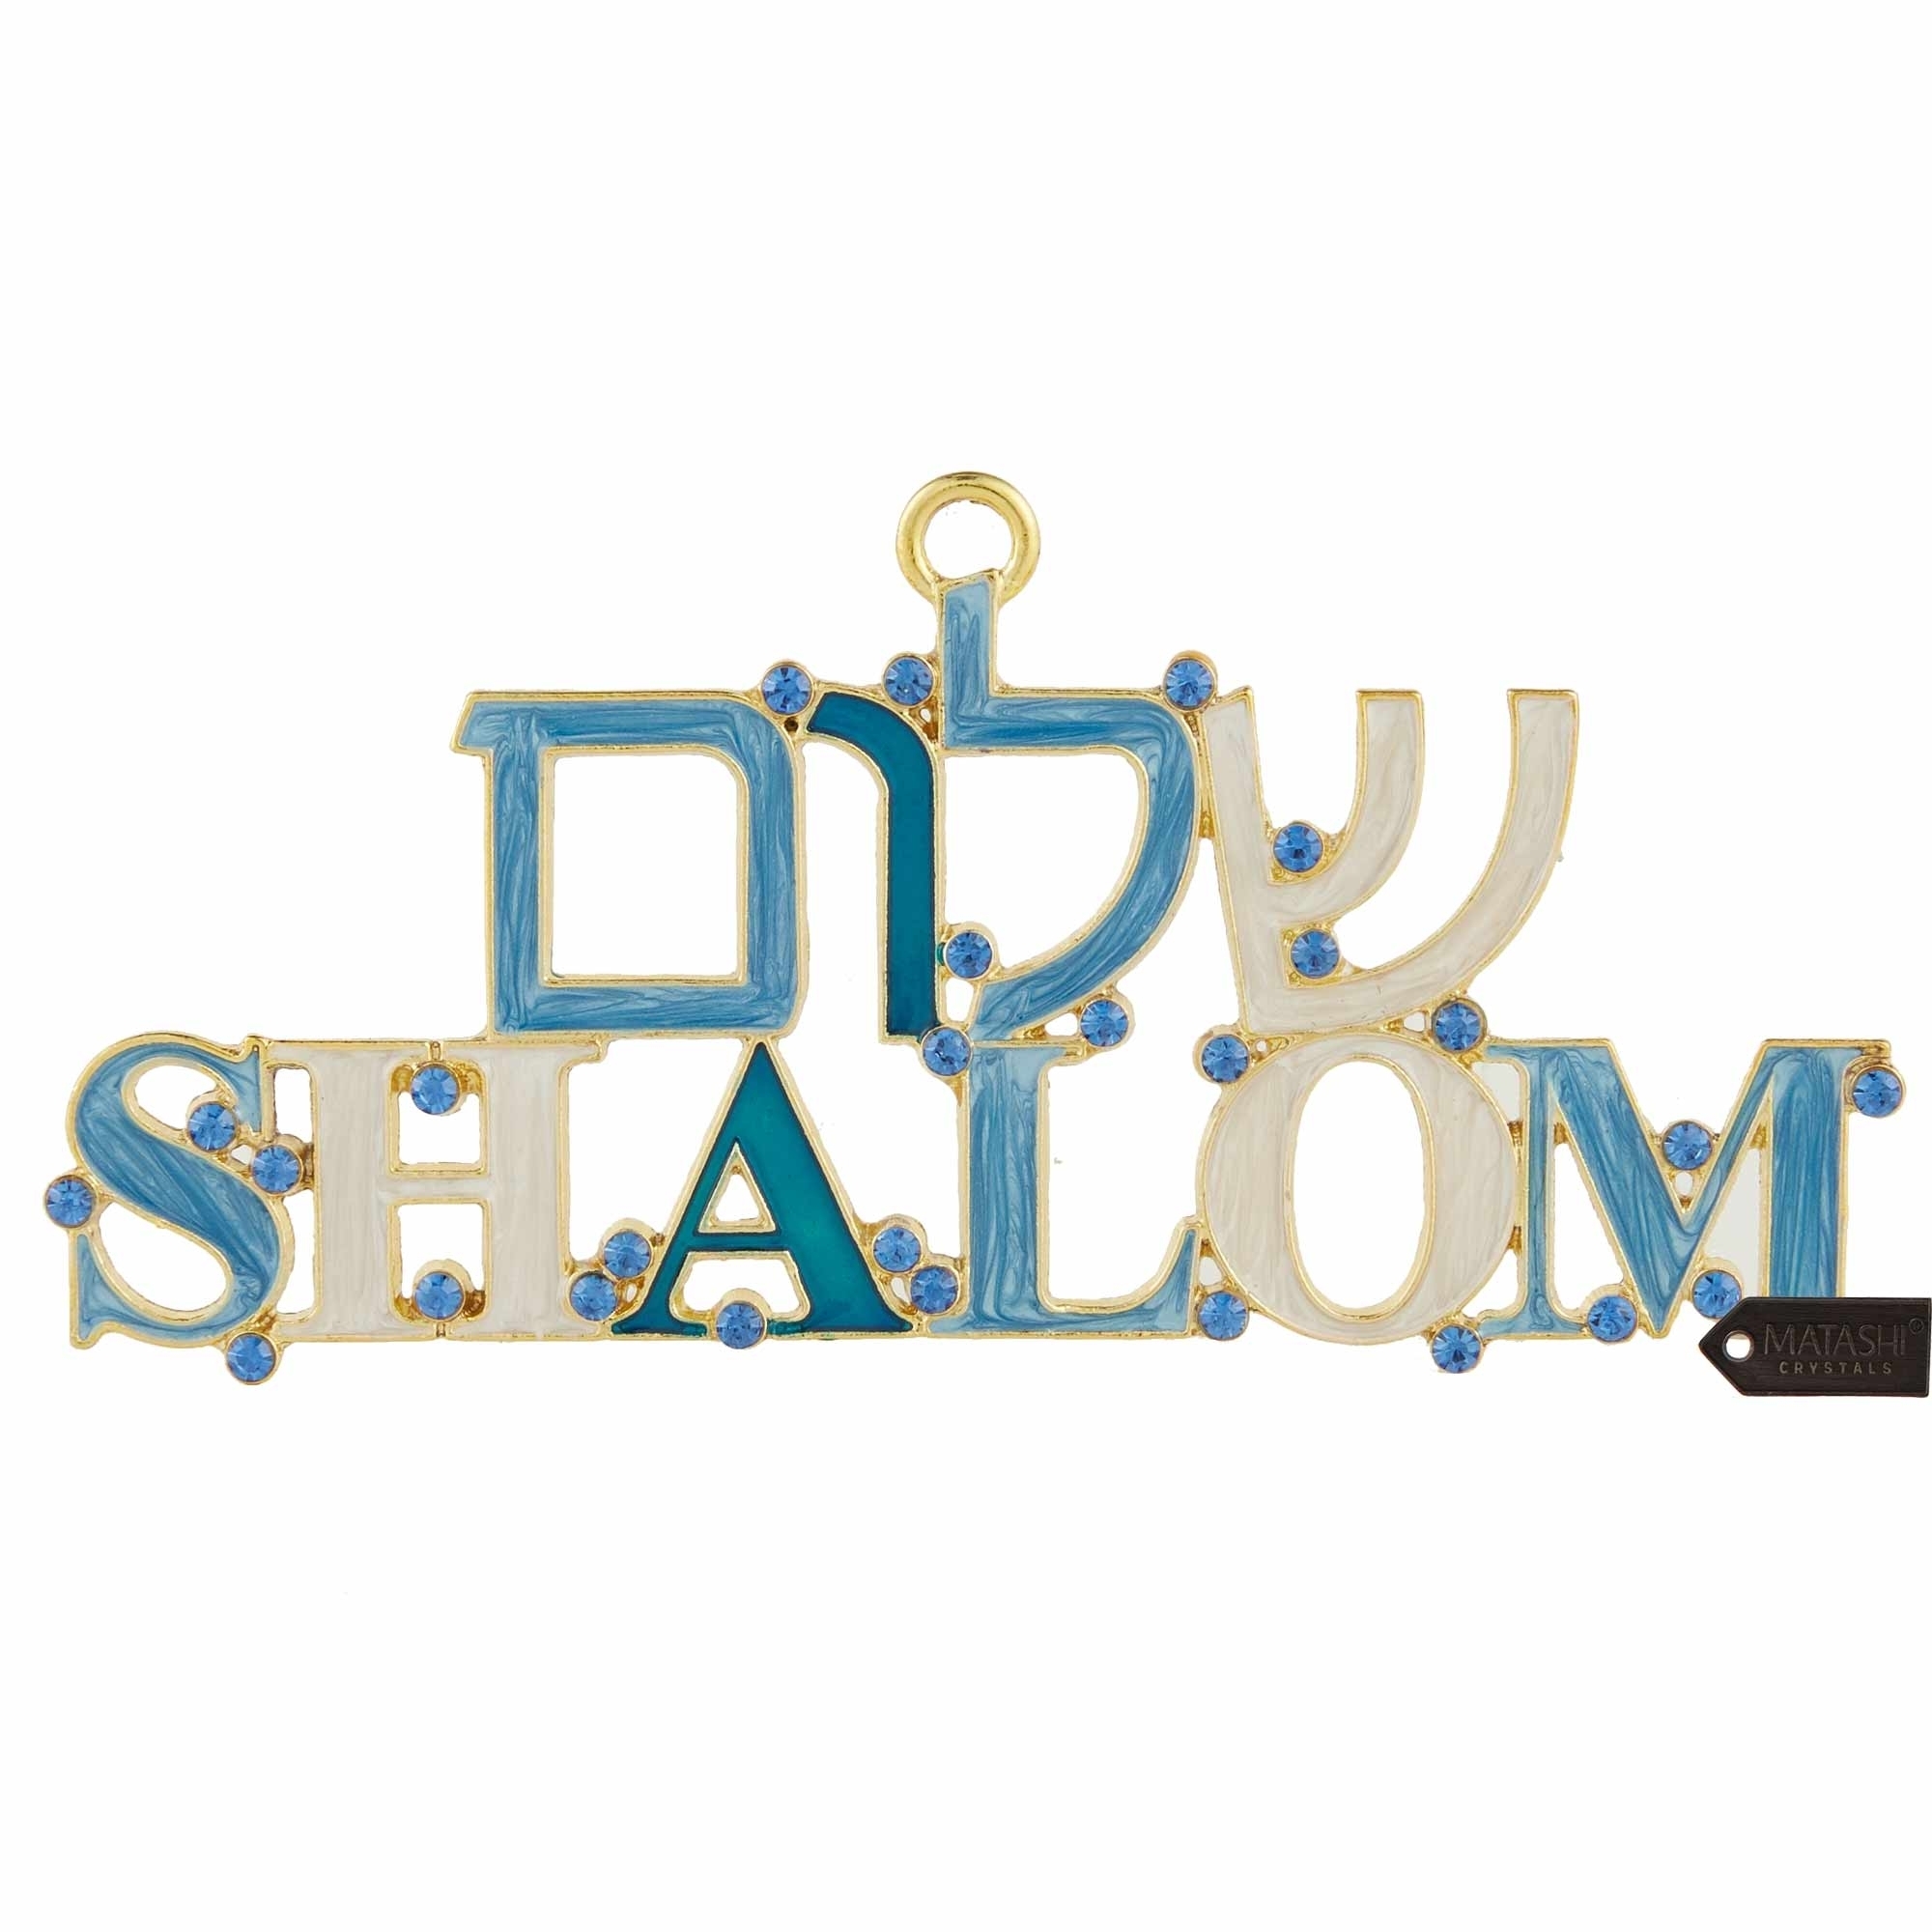 Matashi Hebrew Judaica Shalom Welcome Wall Art Sign For Home, Hanging Wall Ornament W/ Crystals (Pewter) Wall Decor For Home Holiday Gift